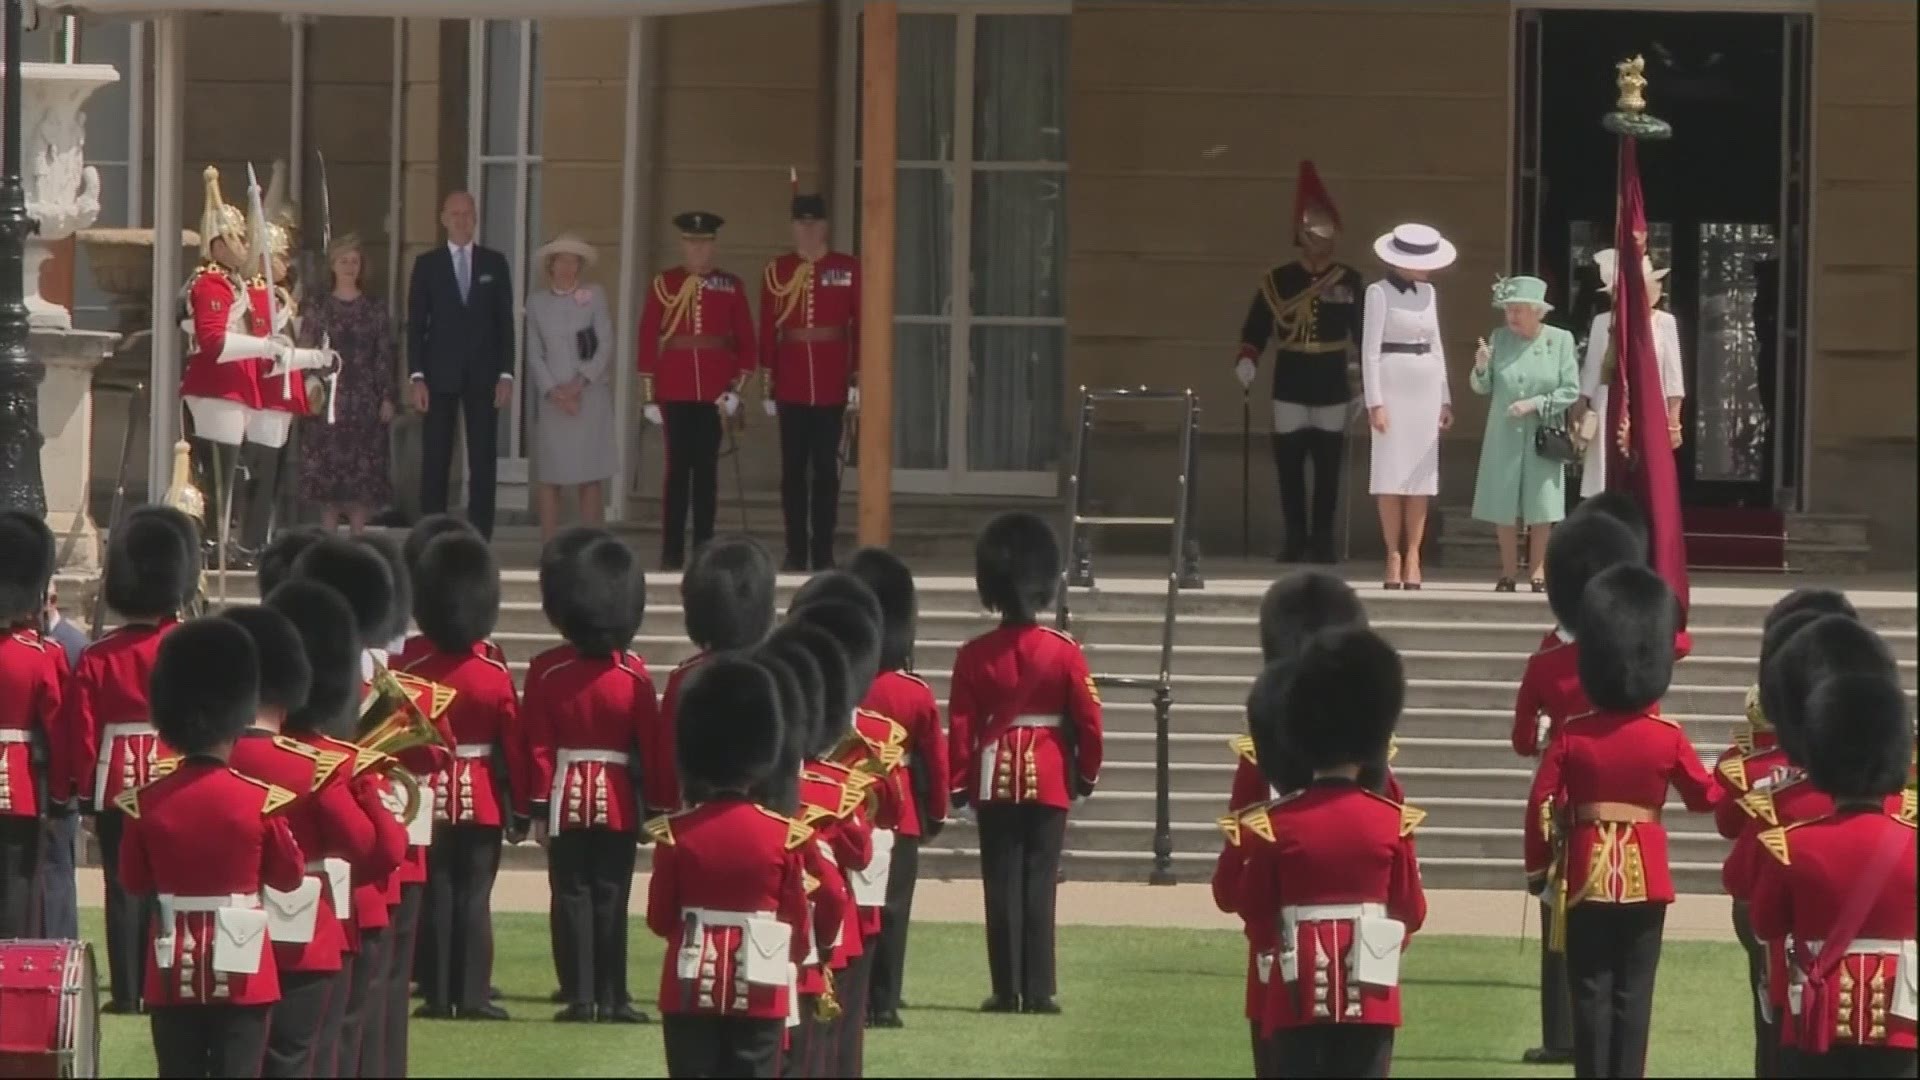 President Donald Trump and his wife Melania were greeted on the grand lawn of Buckingham Palace by Queen Elizabeth II and inspected the Guard of Honor formed by the Grenadier Guards wearing the traditional bearskin hats.